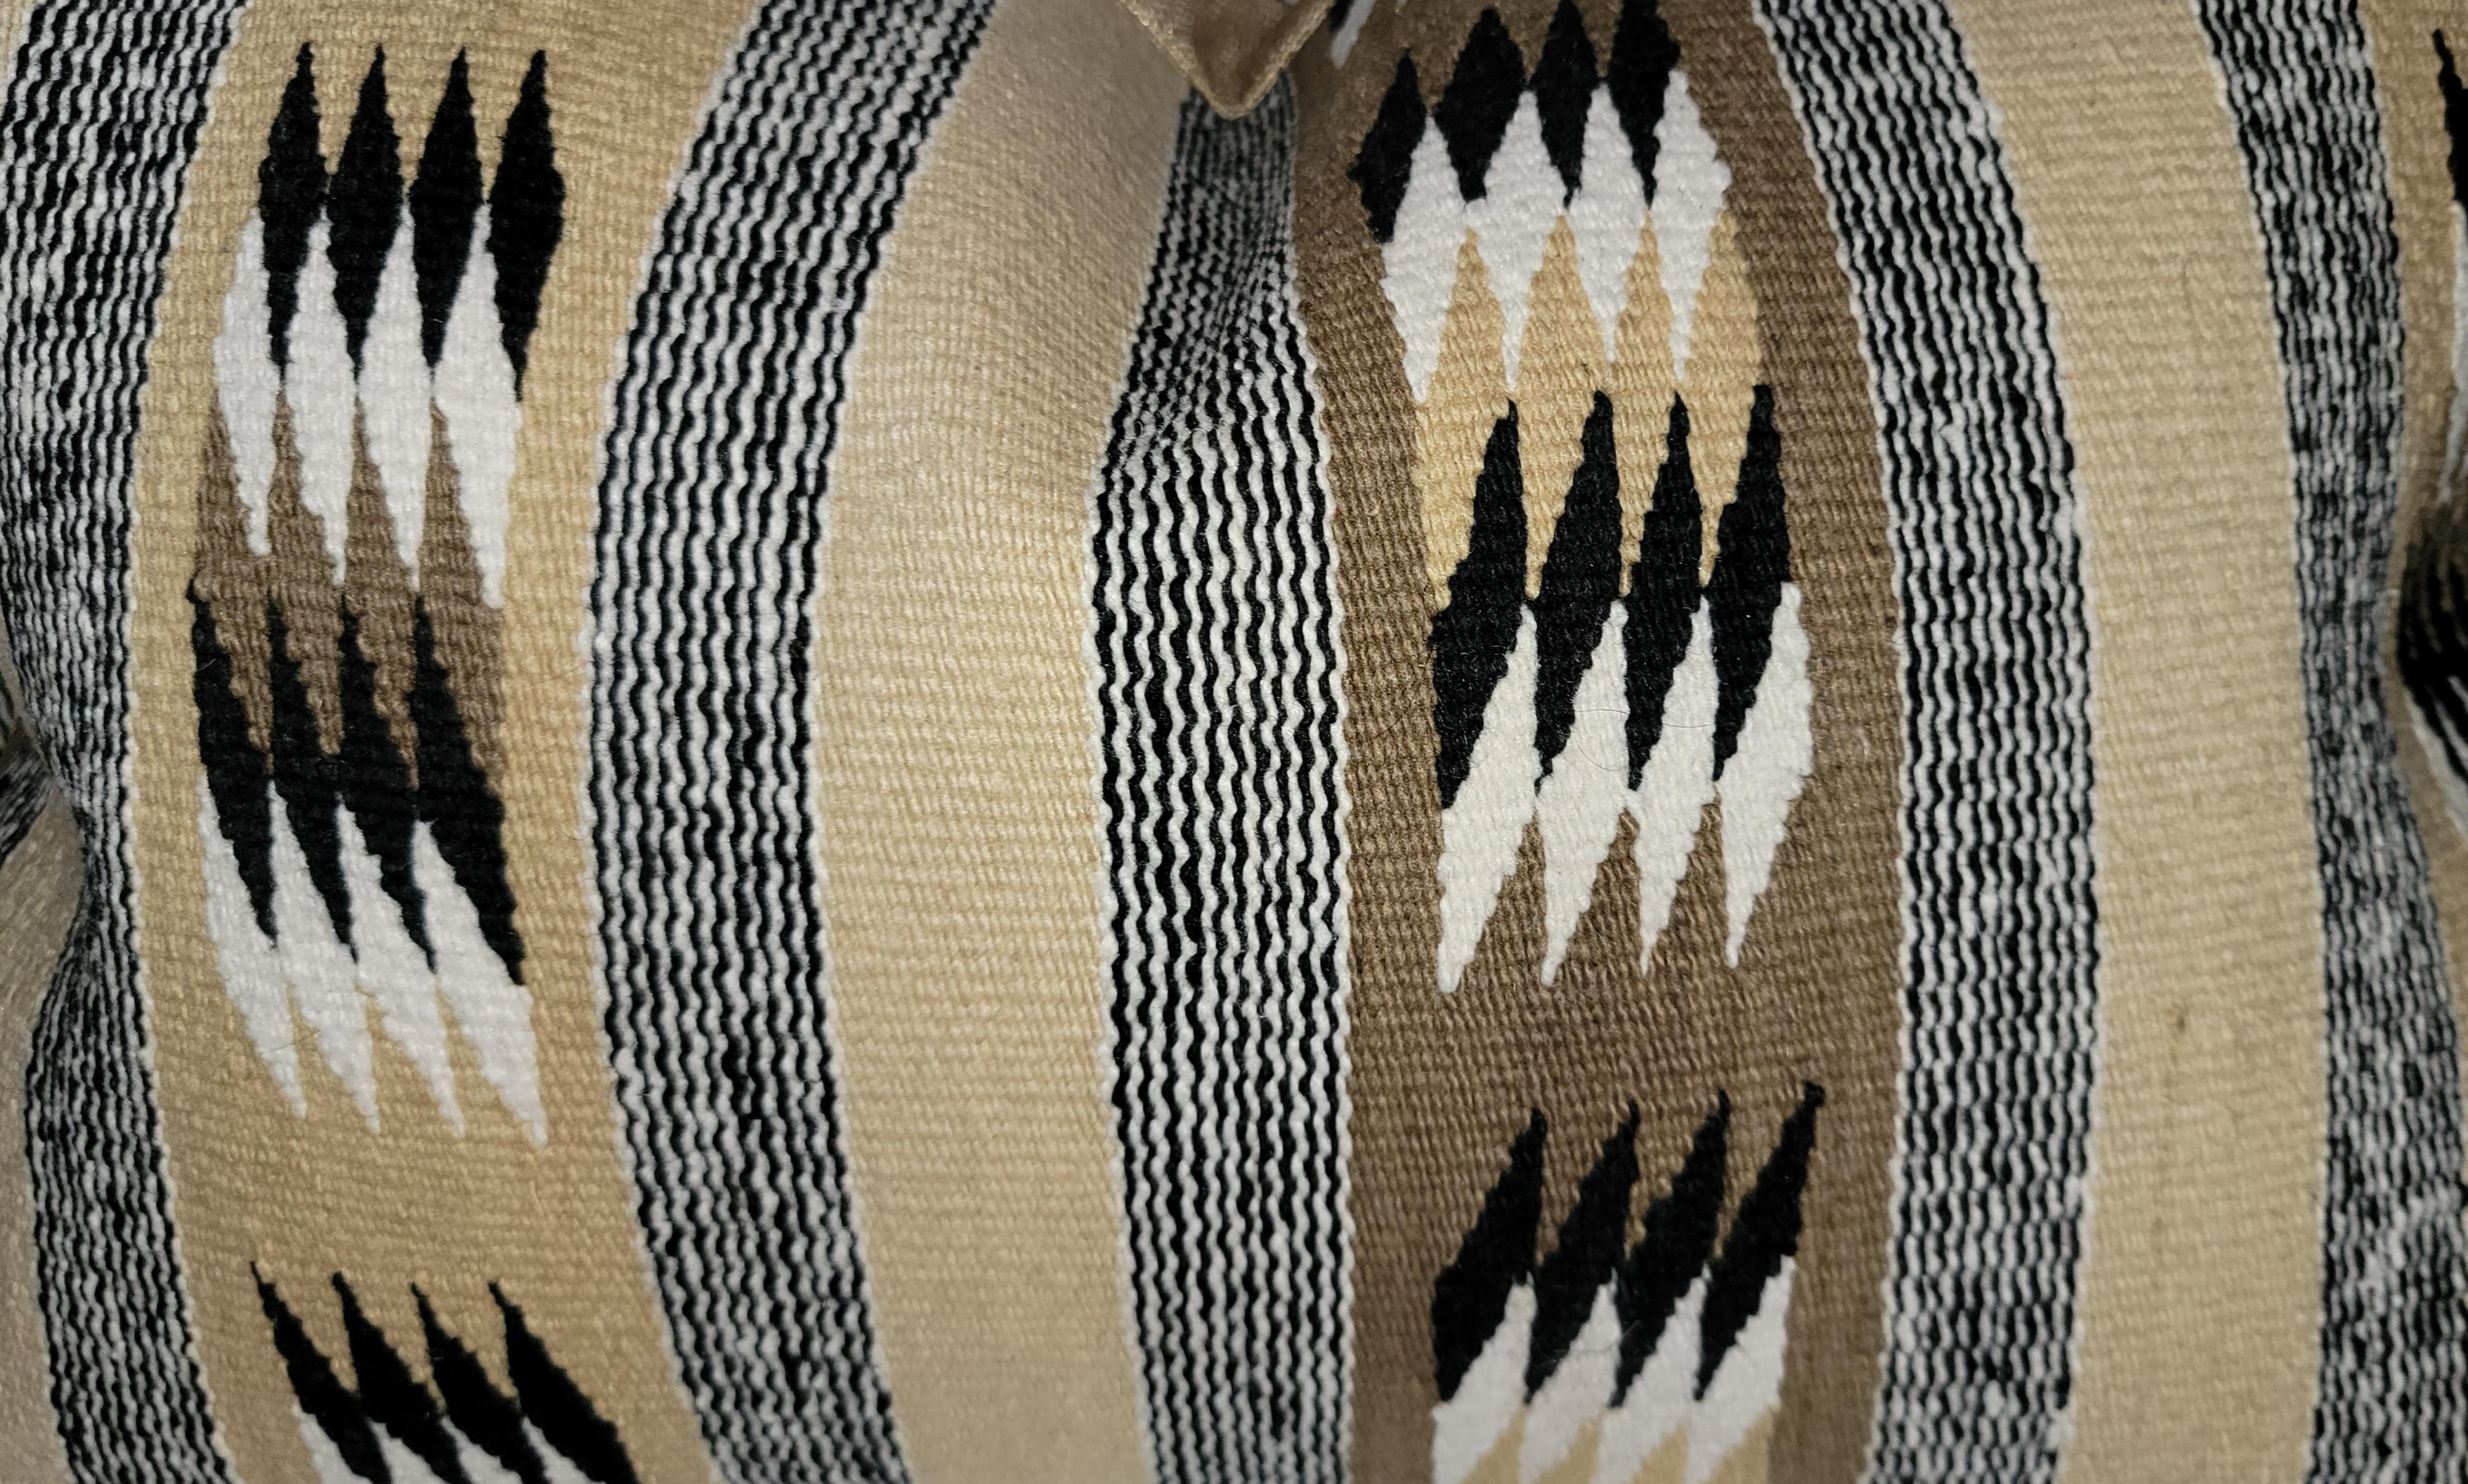 Chinle Navajo Indian weaving bolster pillows - pair. Feather and down inserts. Zippered shams.